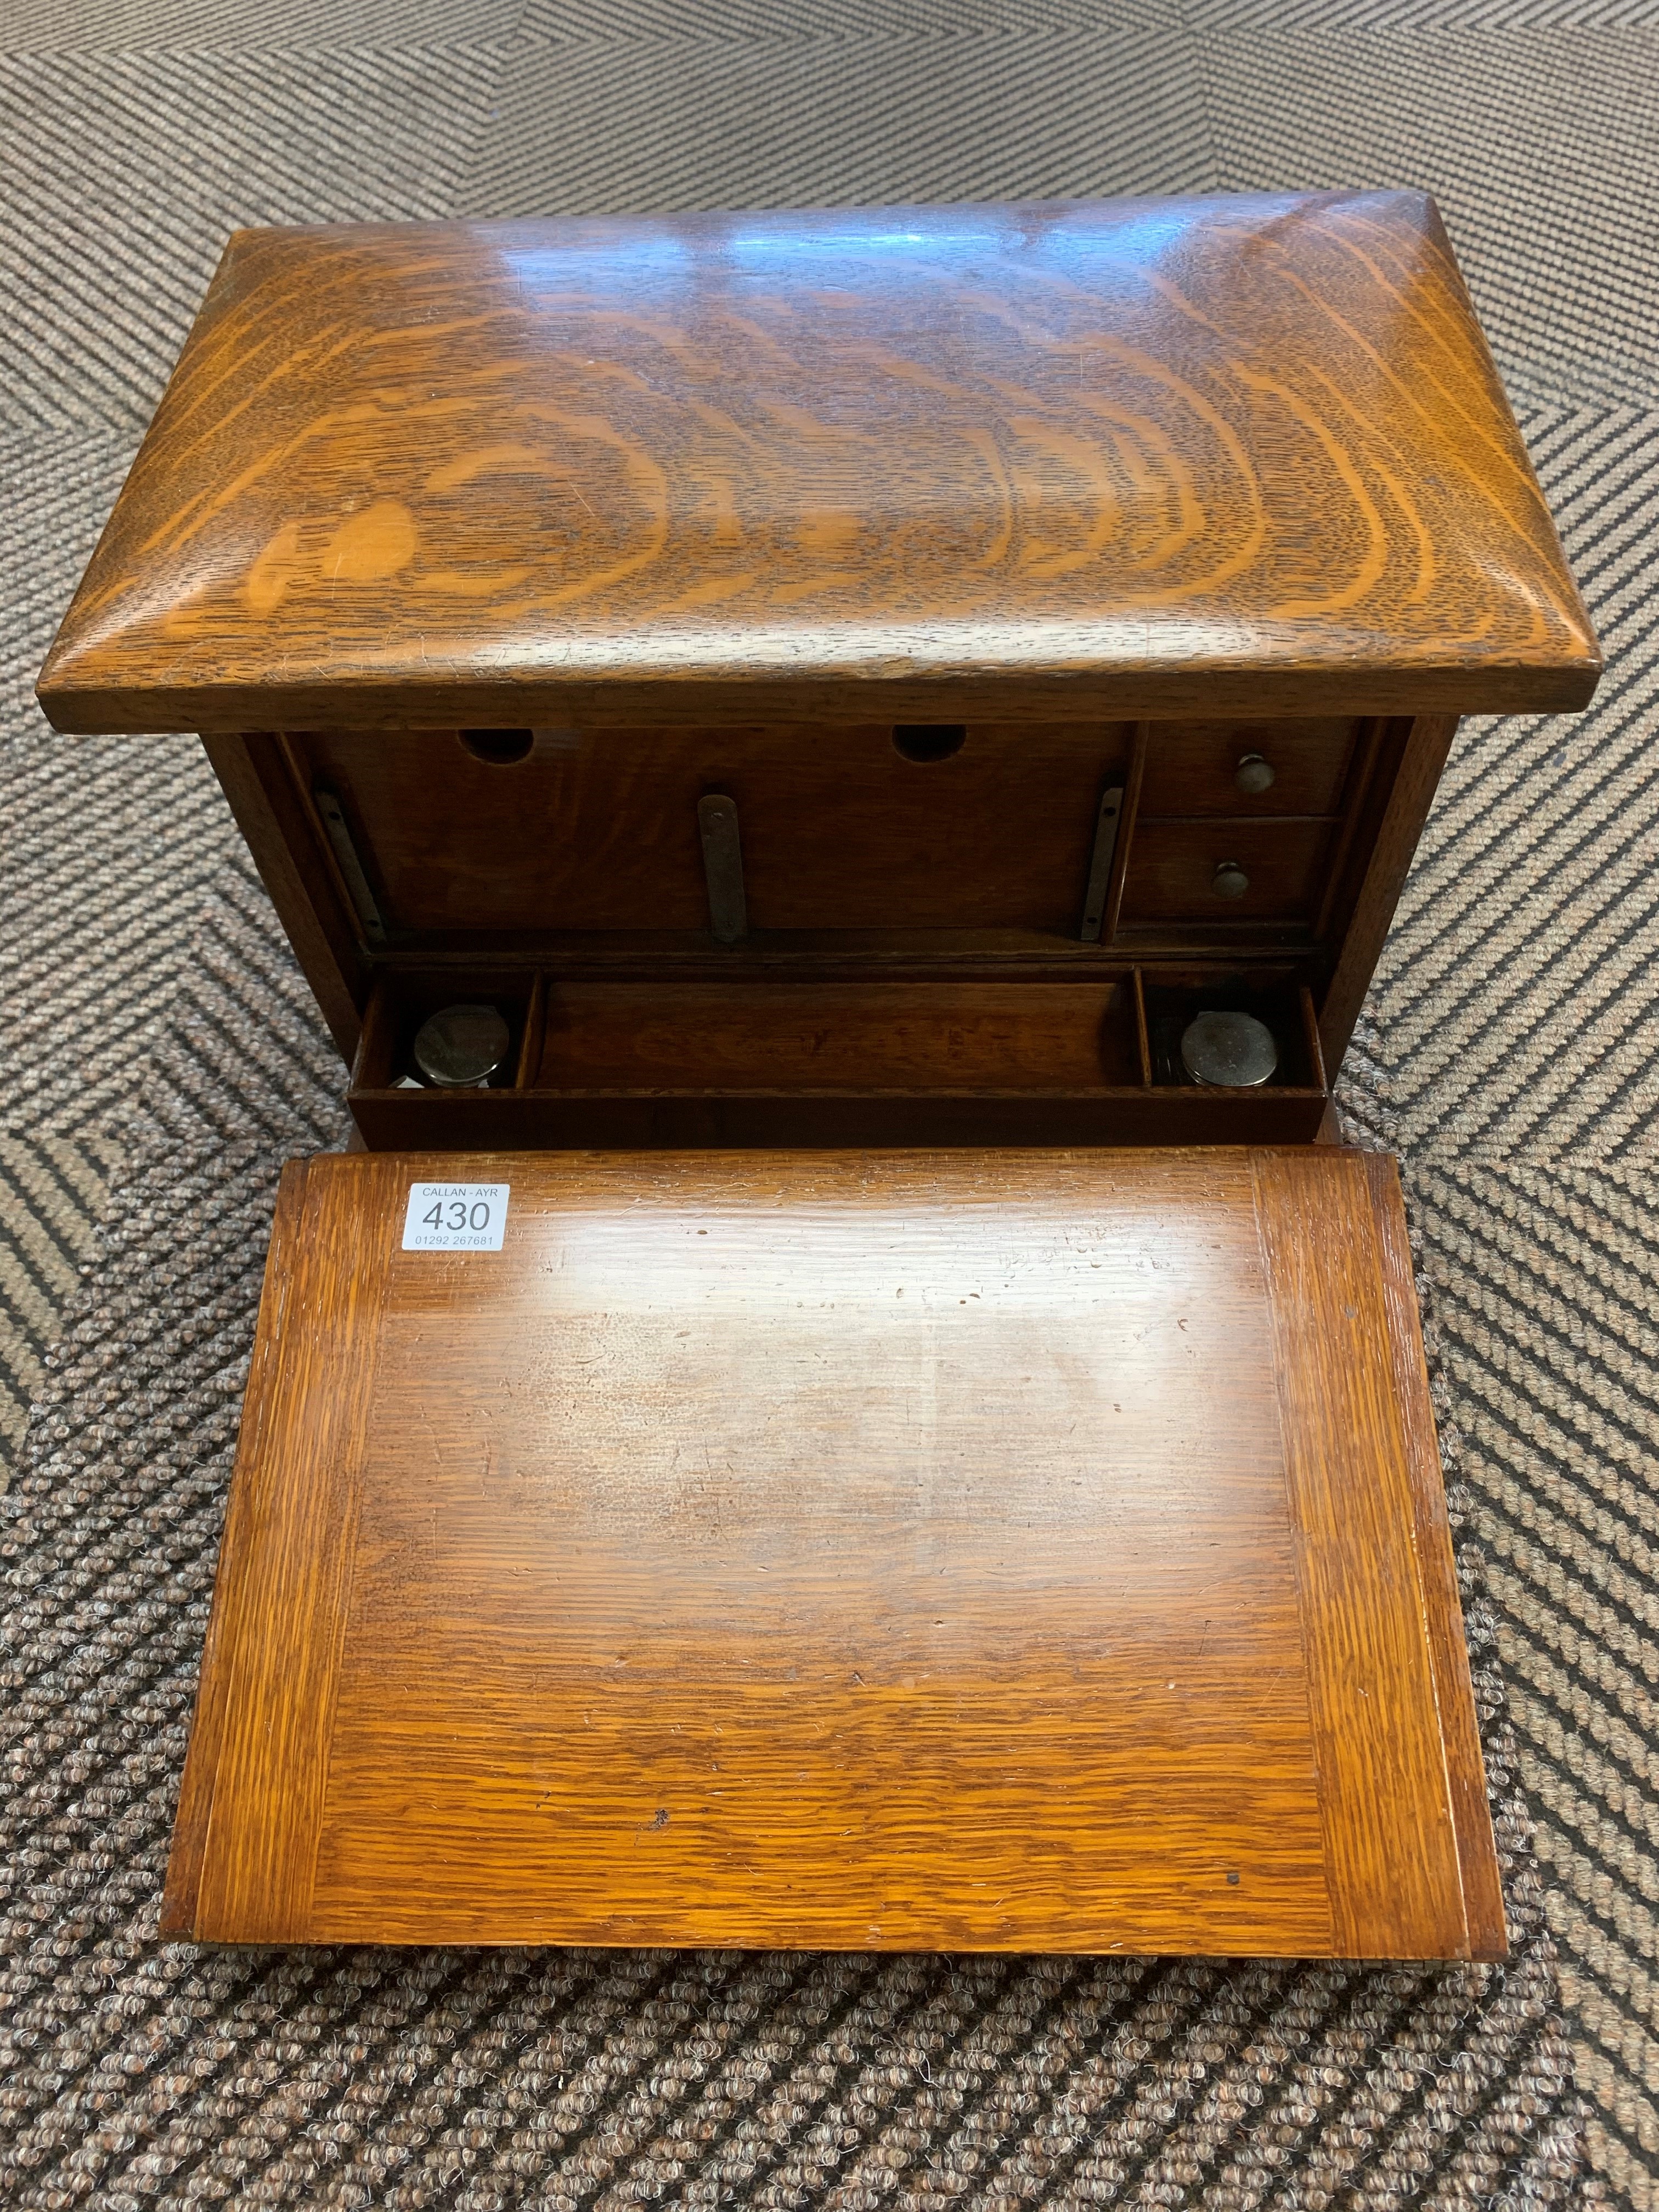 Edwardian light oak stationery and writing box, hinged cover revealing a fitted stationery - Image 2 of 4